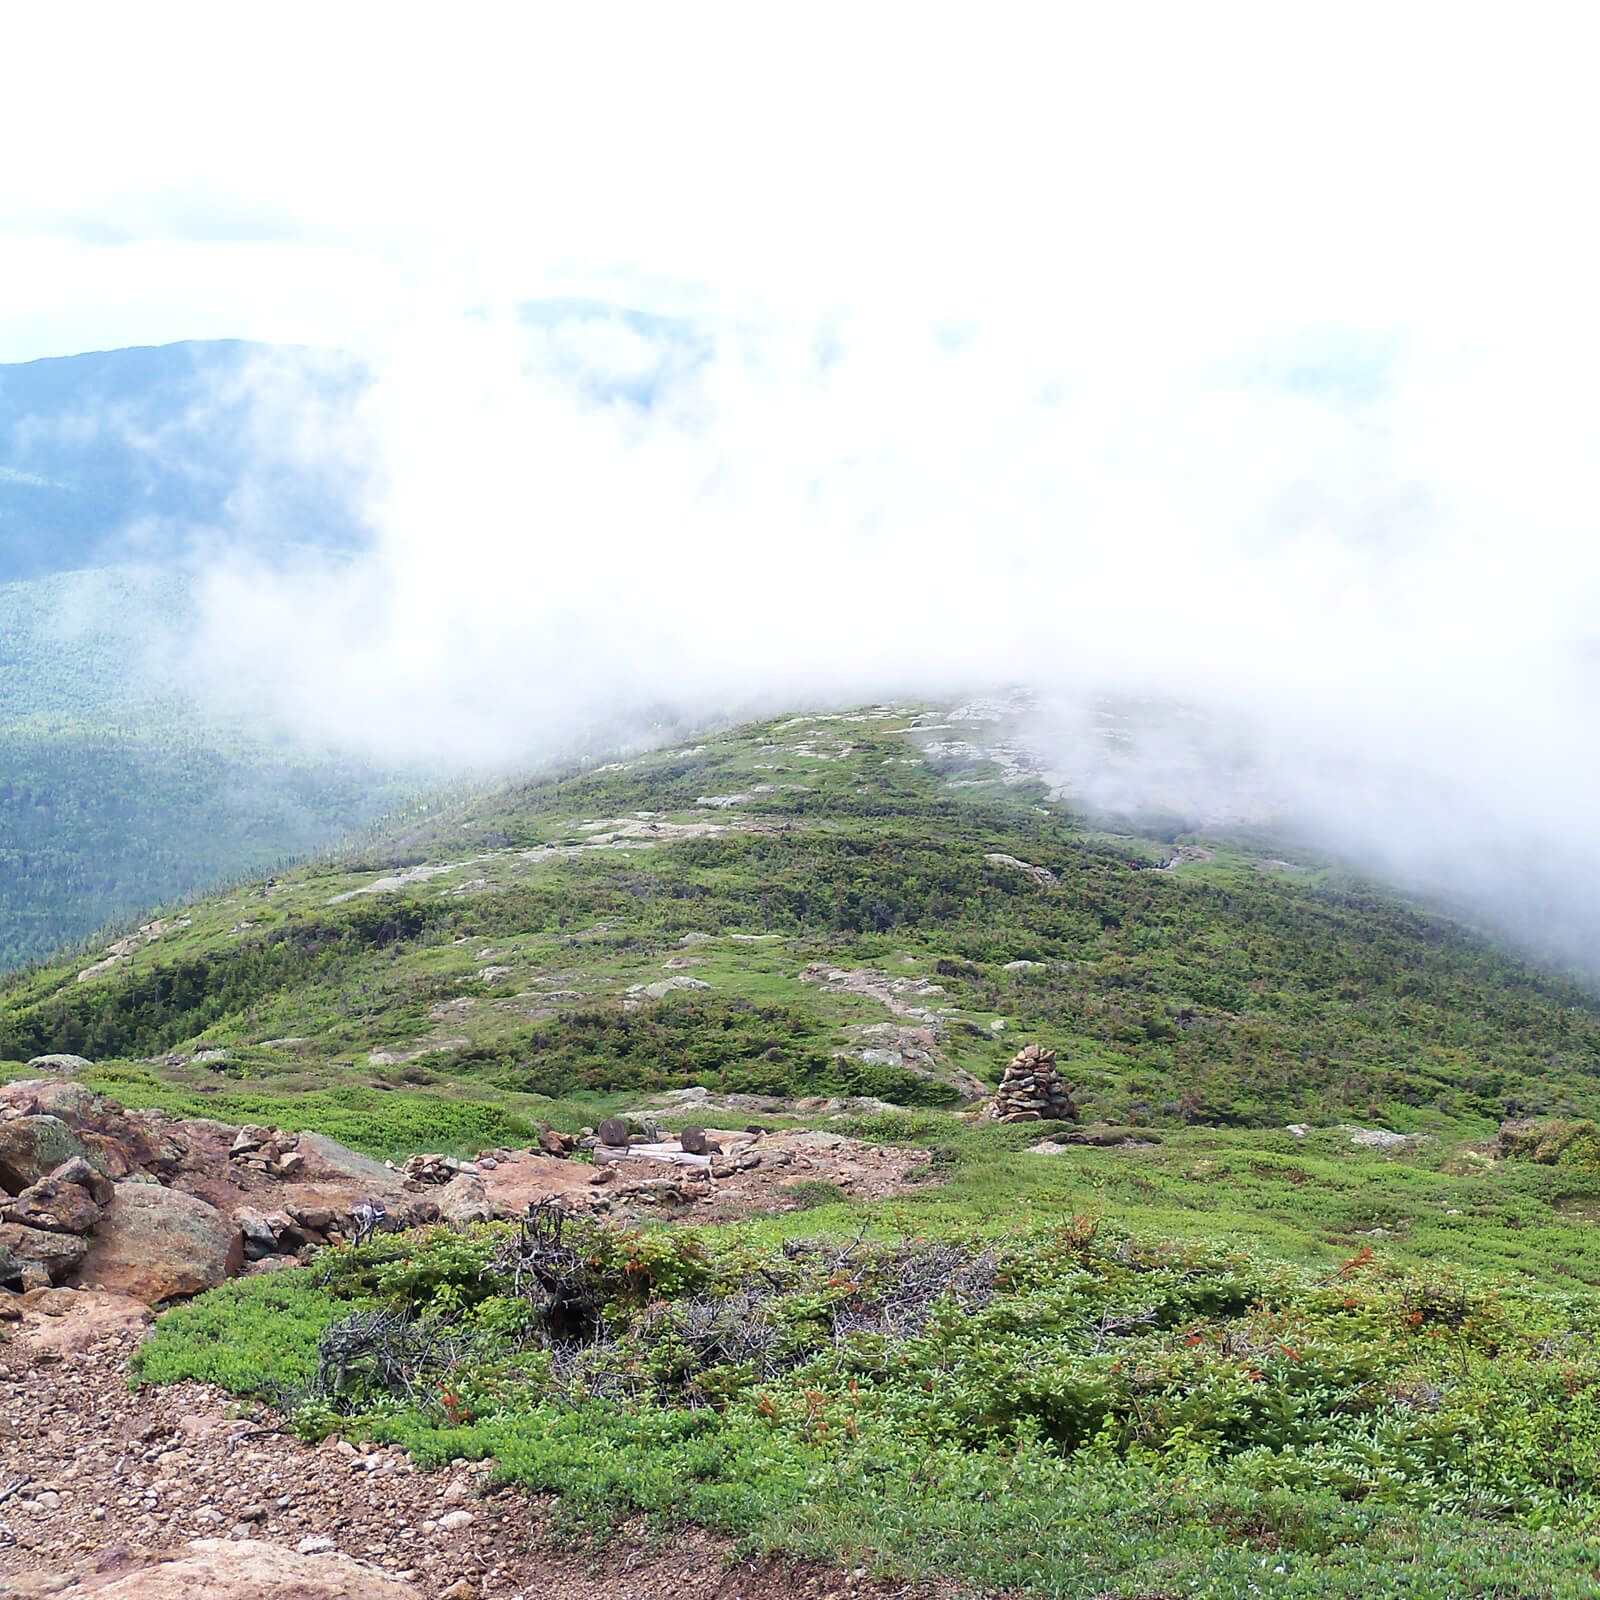 A cloud covers the presidential traverse